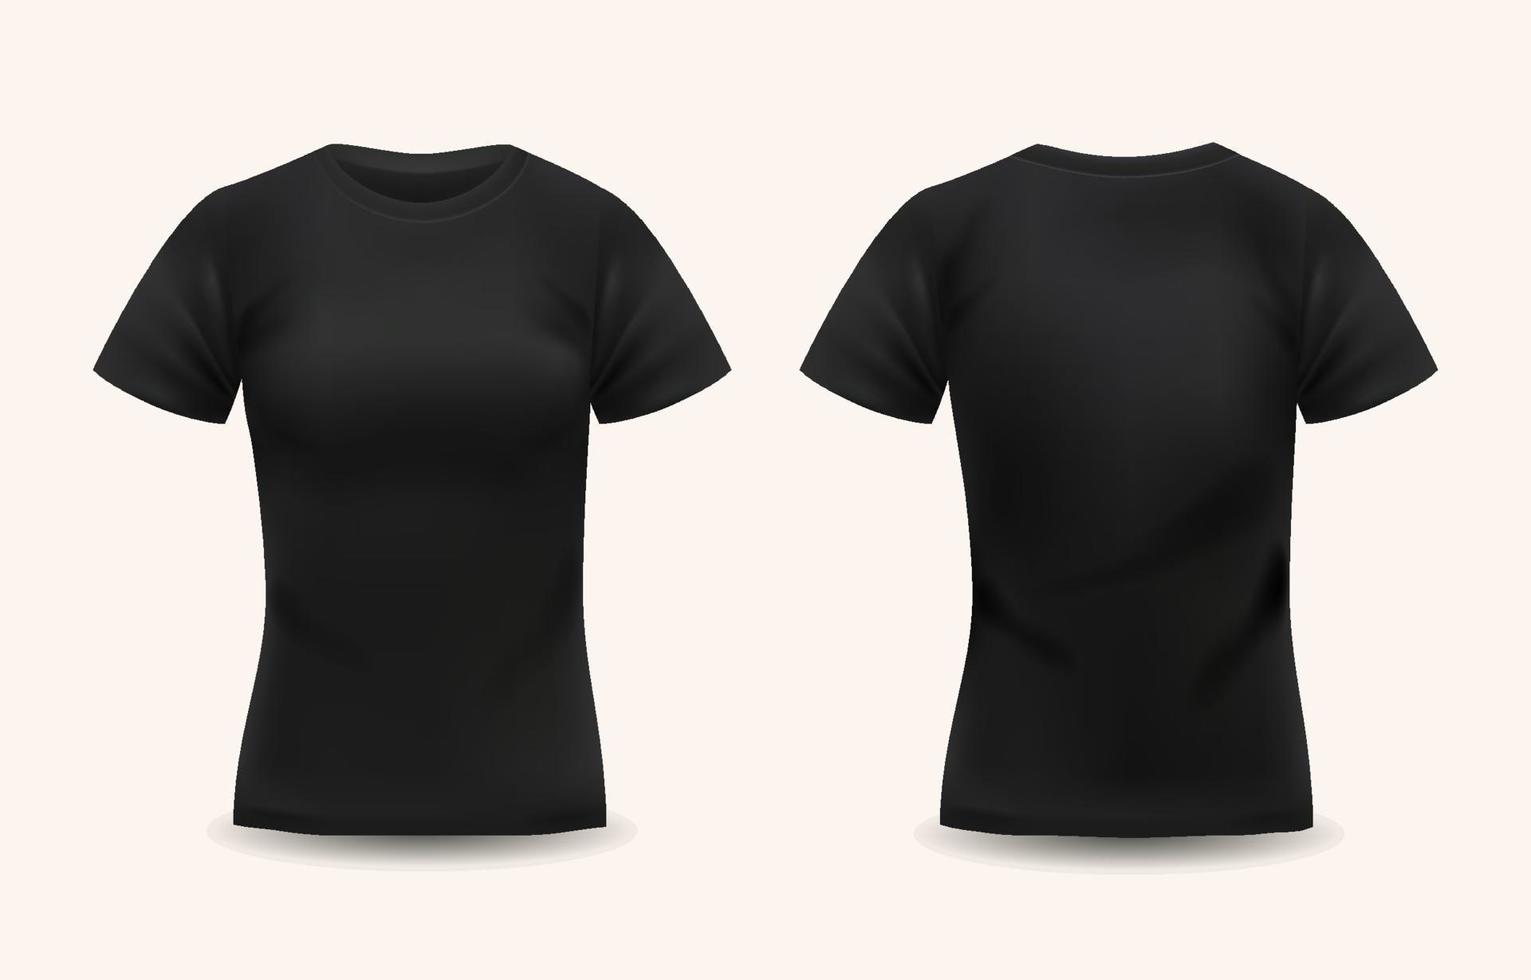 Black Tshirt For Woman Template vector